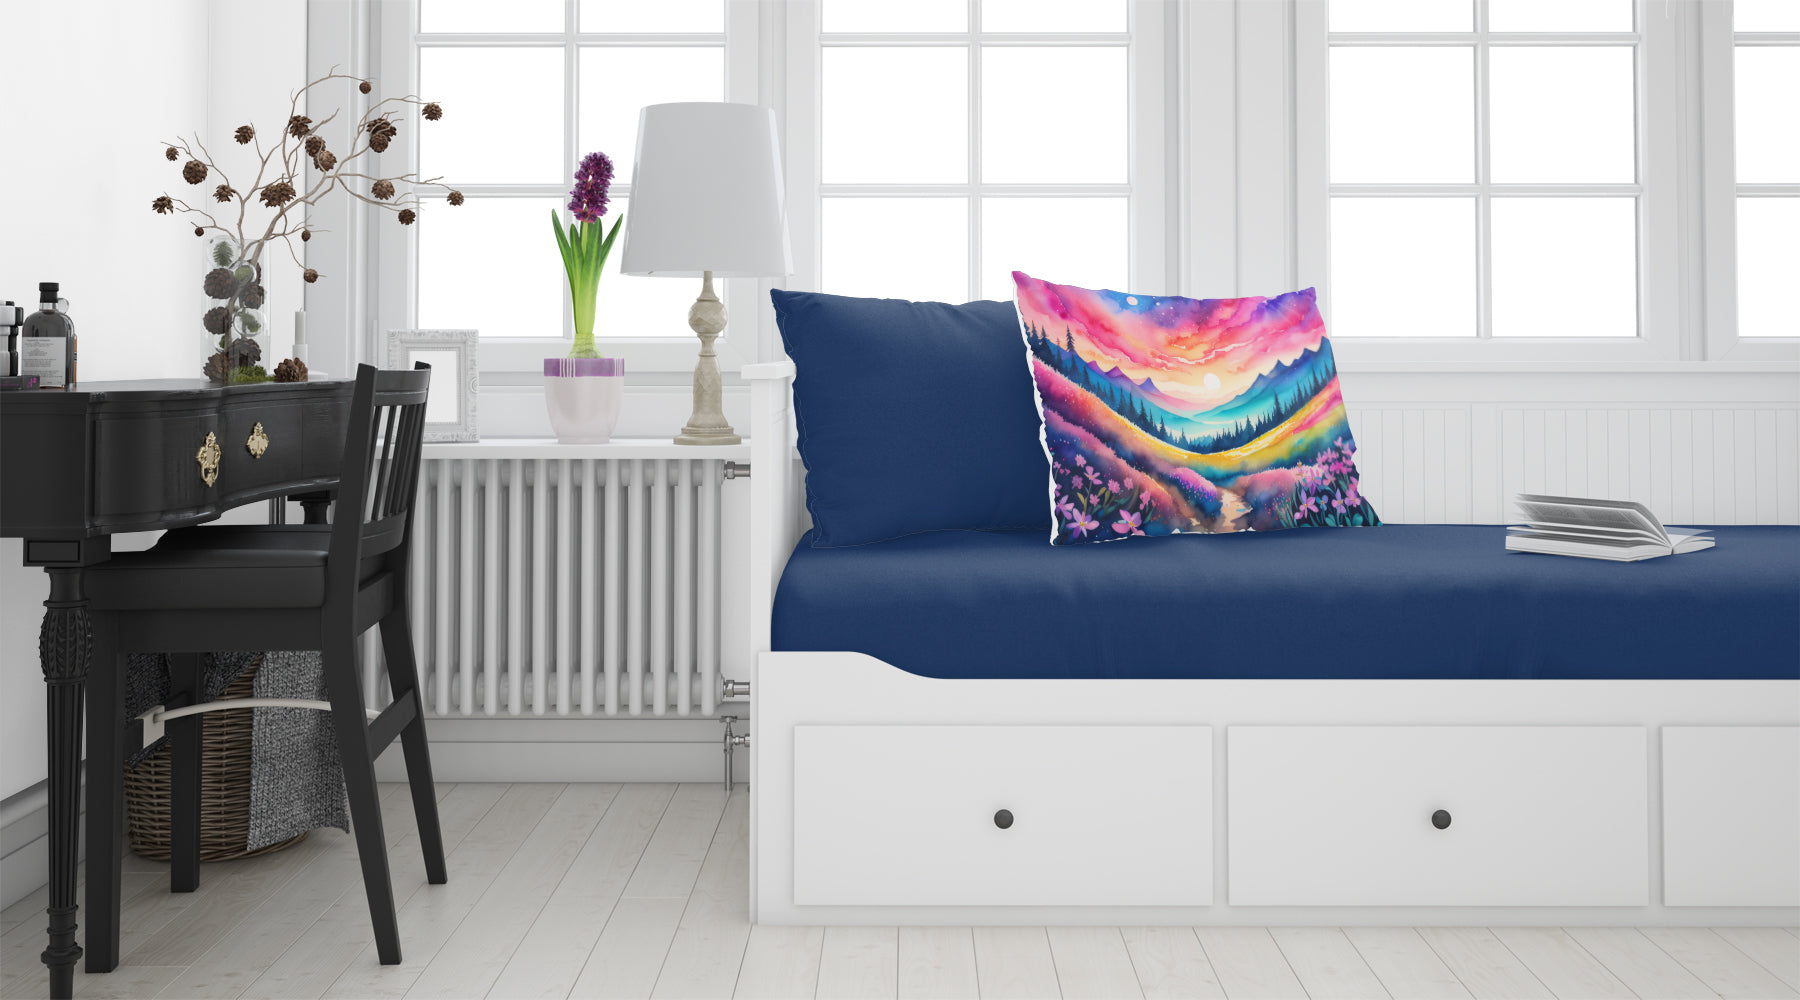 Buy this Phlox in Color Fabric Standard Pillowcase